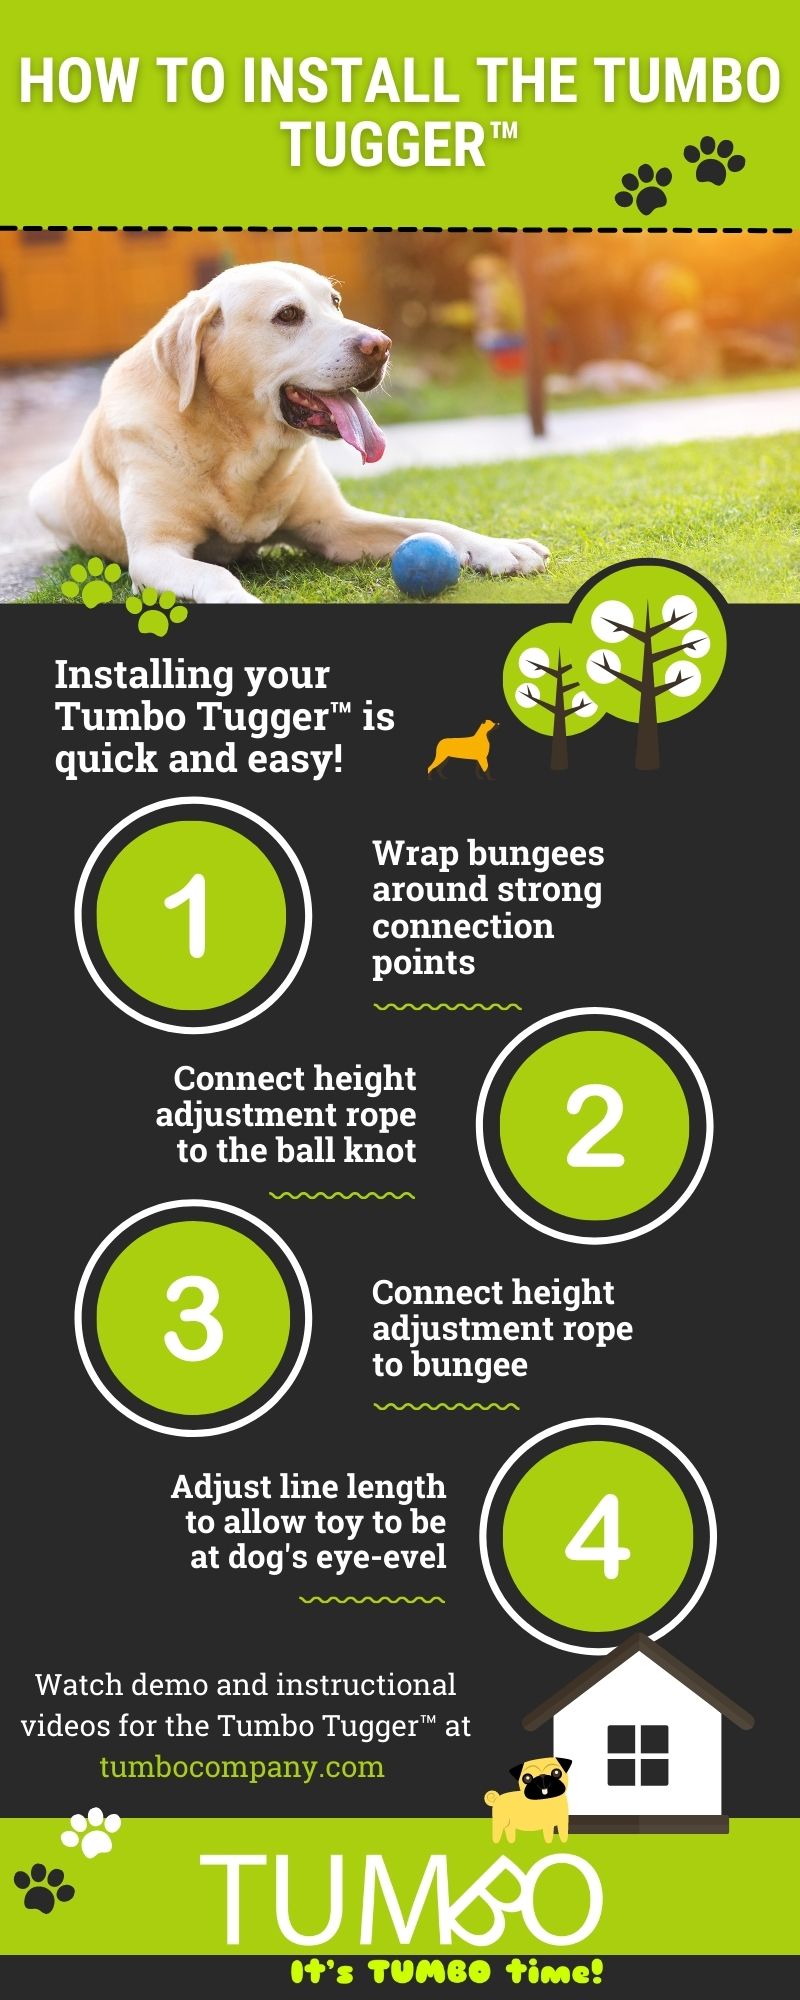 hot to install the tumbo tugger infographic